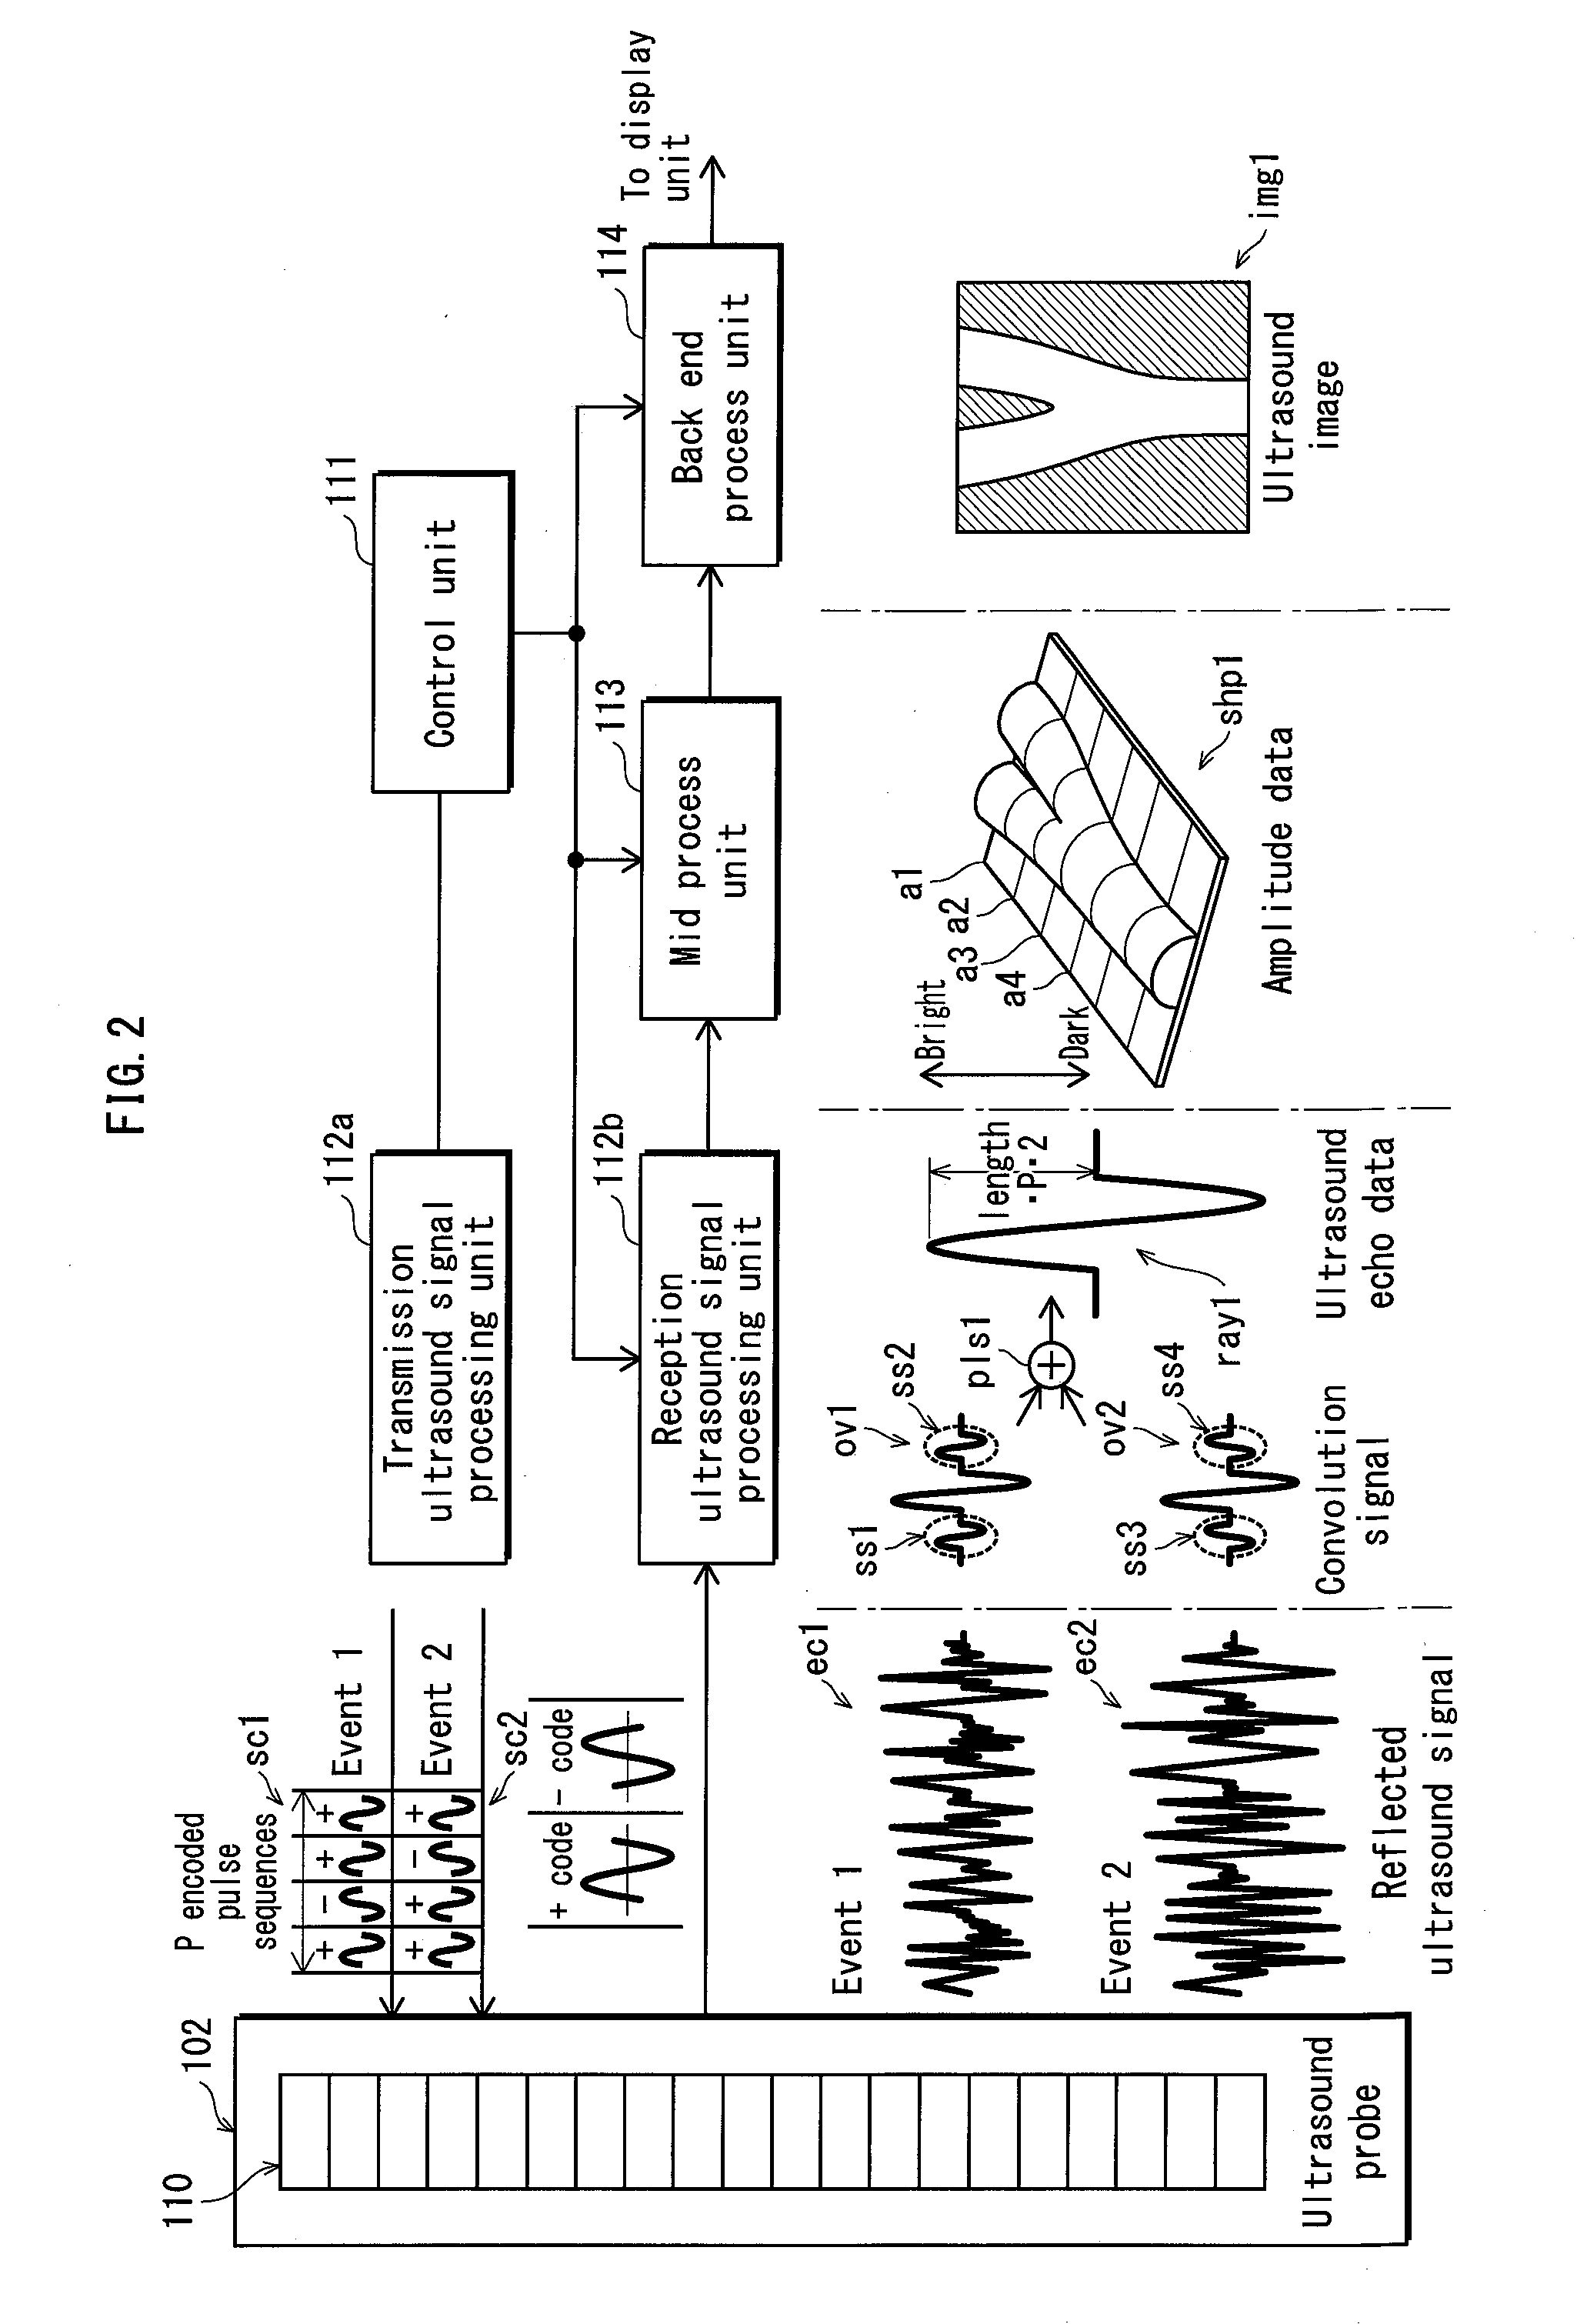 Ultrasound signal processing device, ultrasound signal processing method, and non-transitory computer-readable recording medium